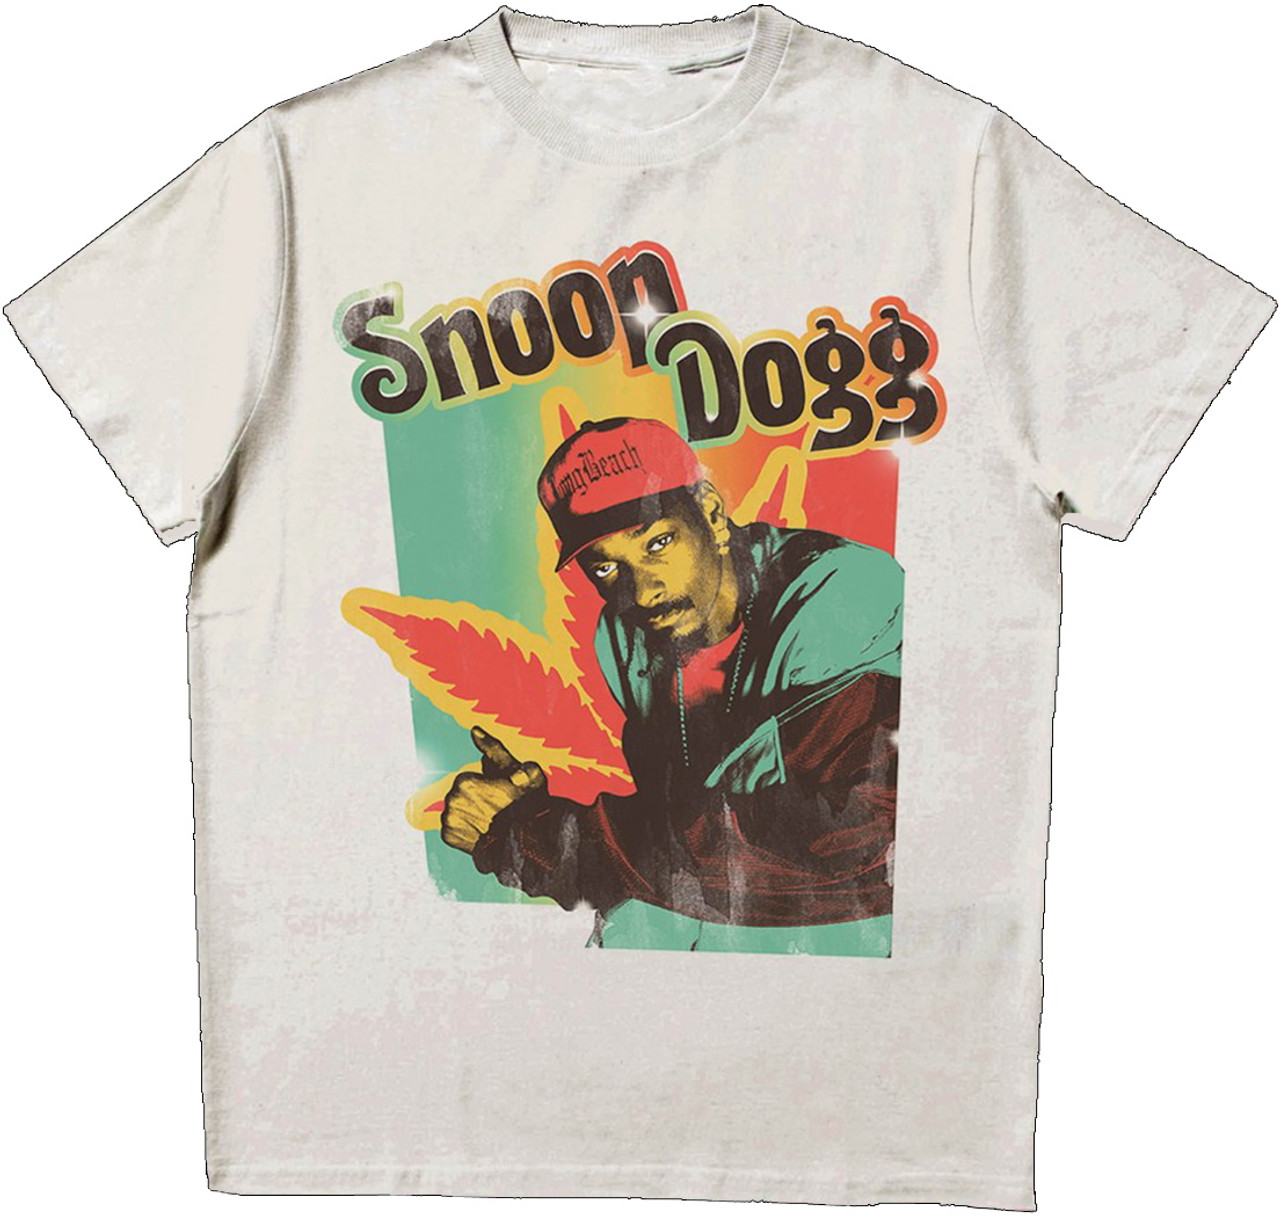 Empire state “snoop dog” Tシャツ スヌープドッグ - daterightstuff.com